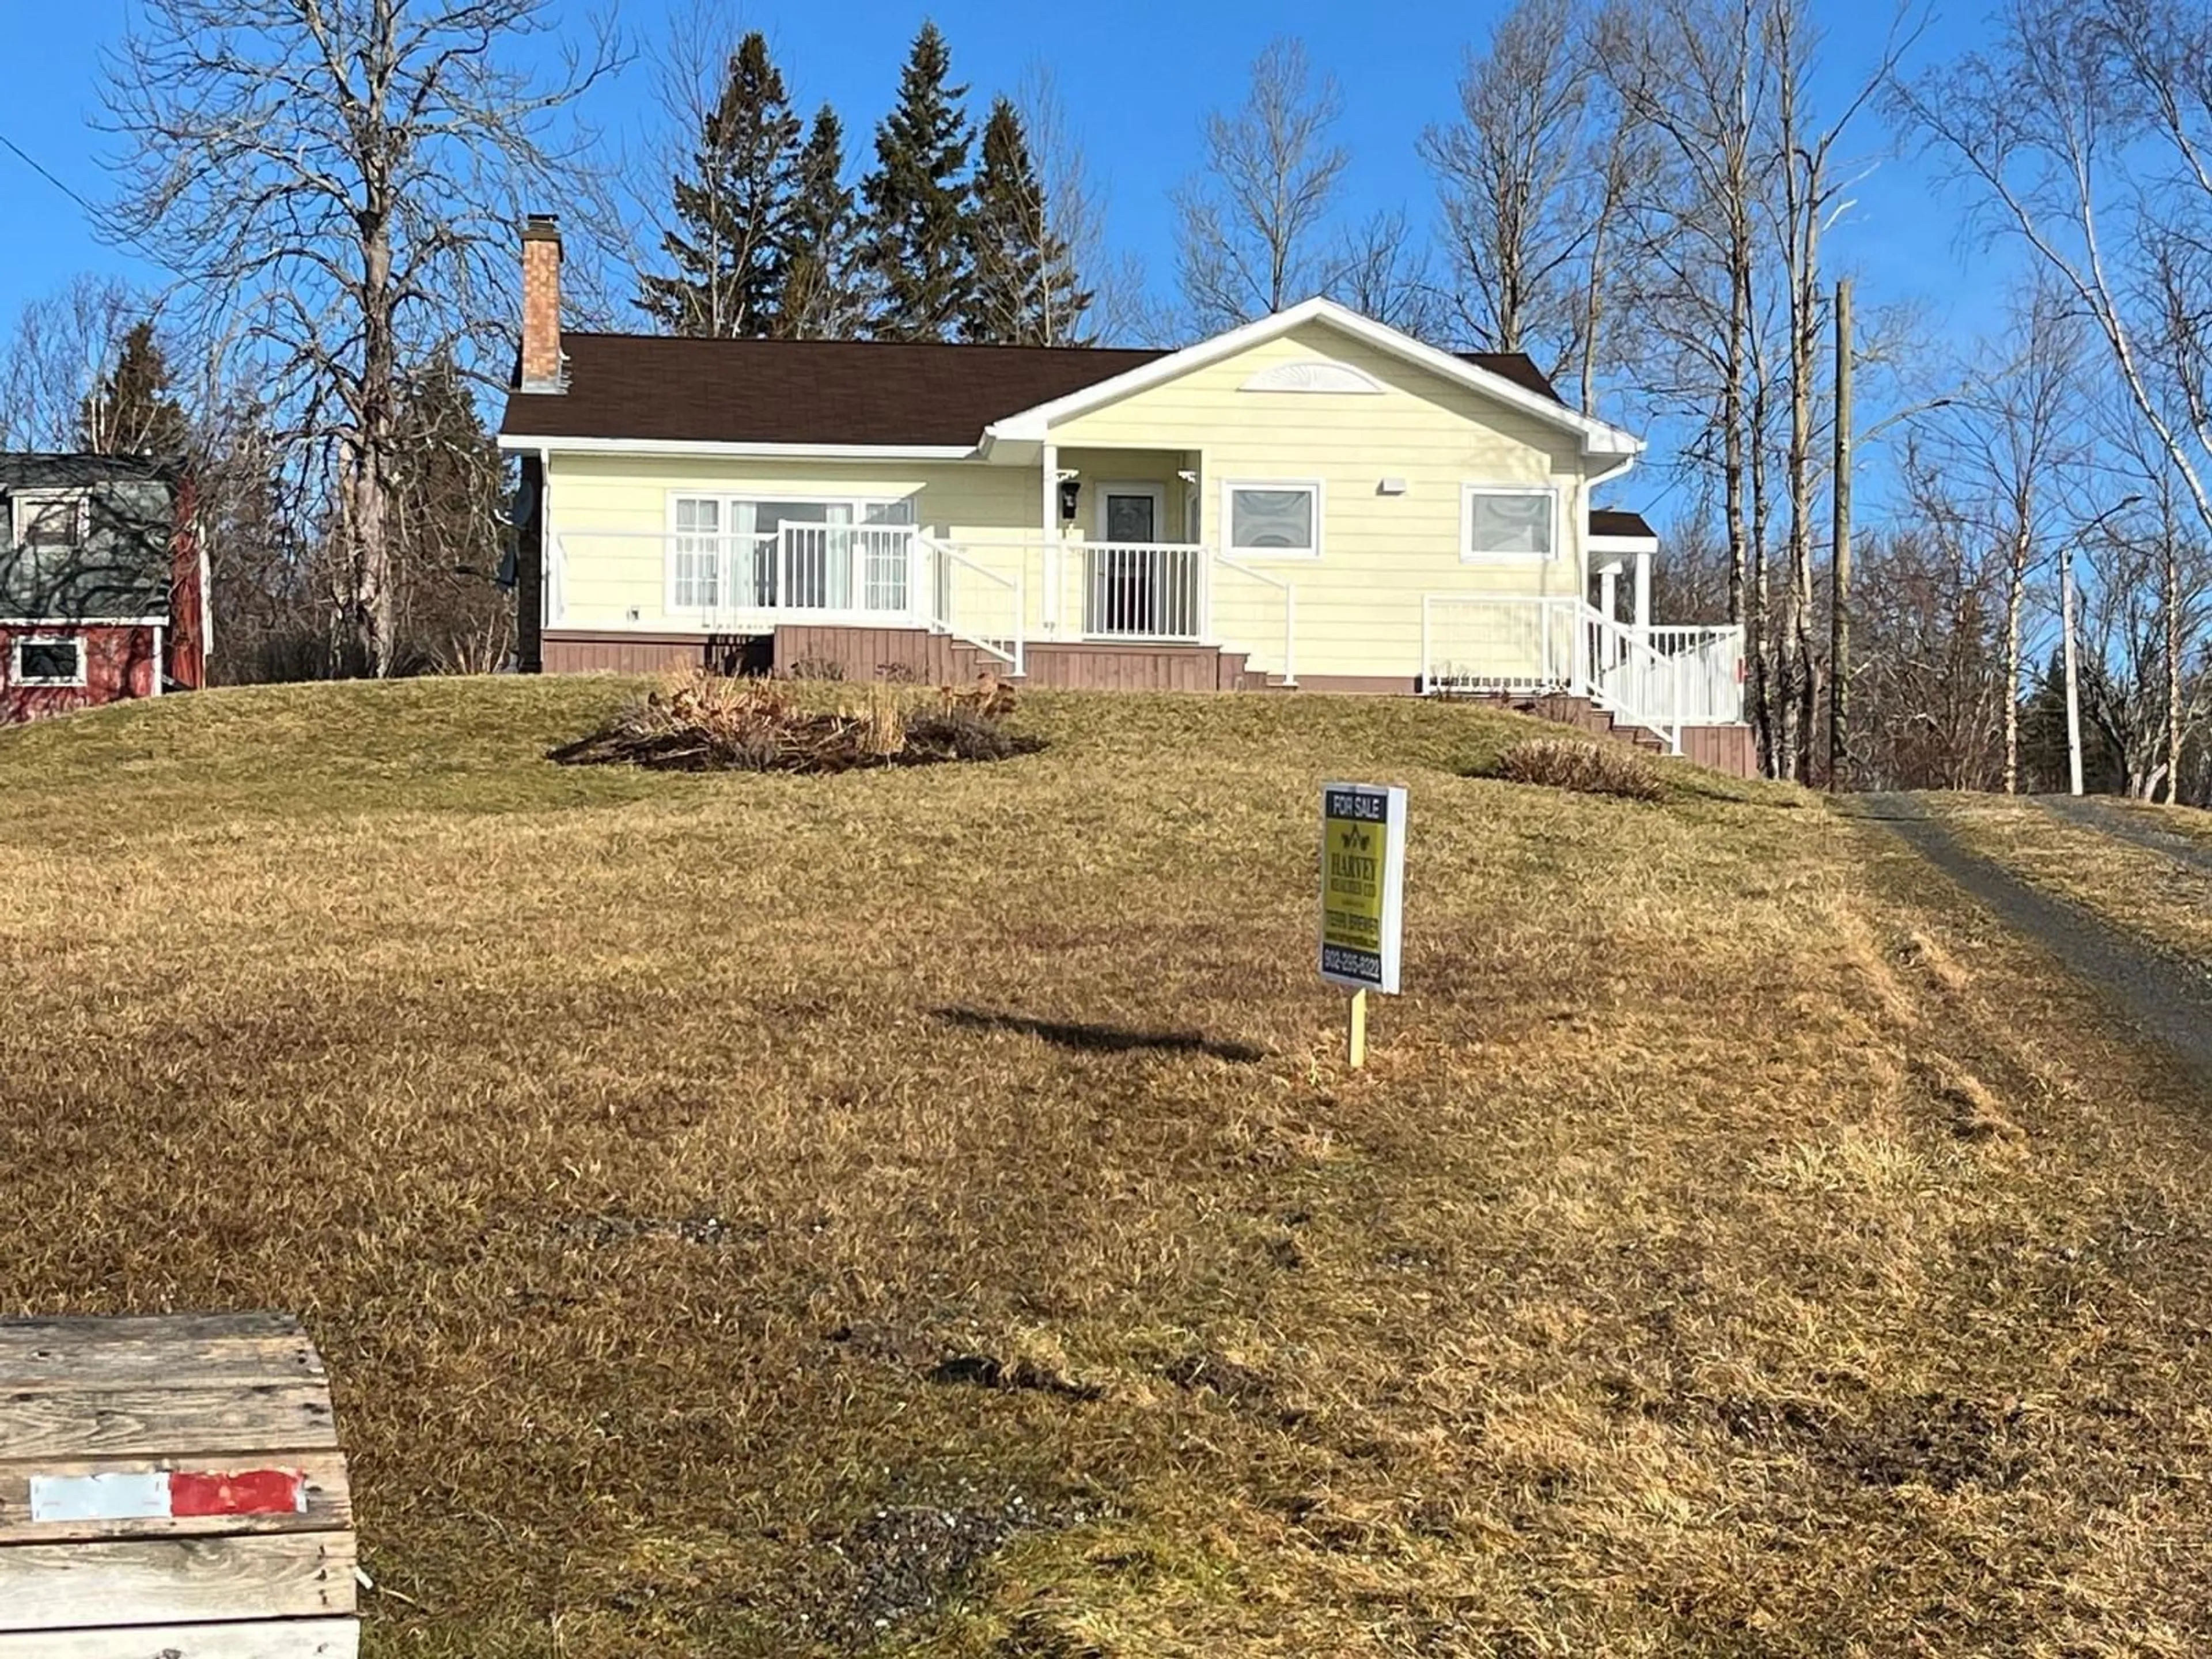 Home with unknown exterior material for 647 Baddeck Bay Rd, Baddeck Bay Nova Scotia B0E 1B0